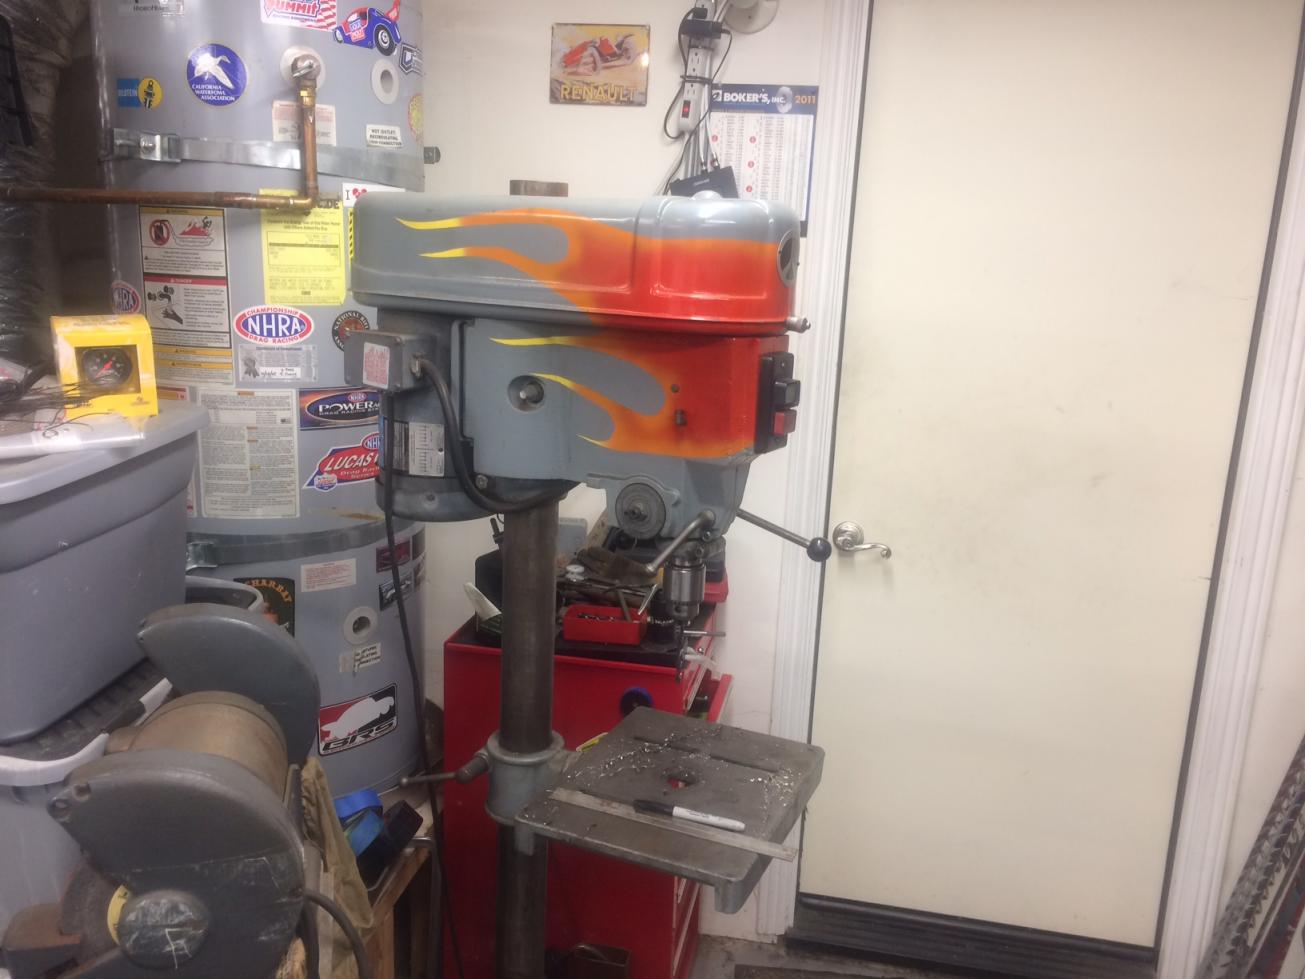 Drill press that I rescued from a backyard, and rebuilt